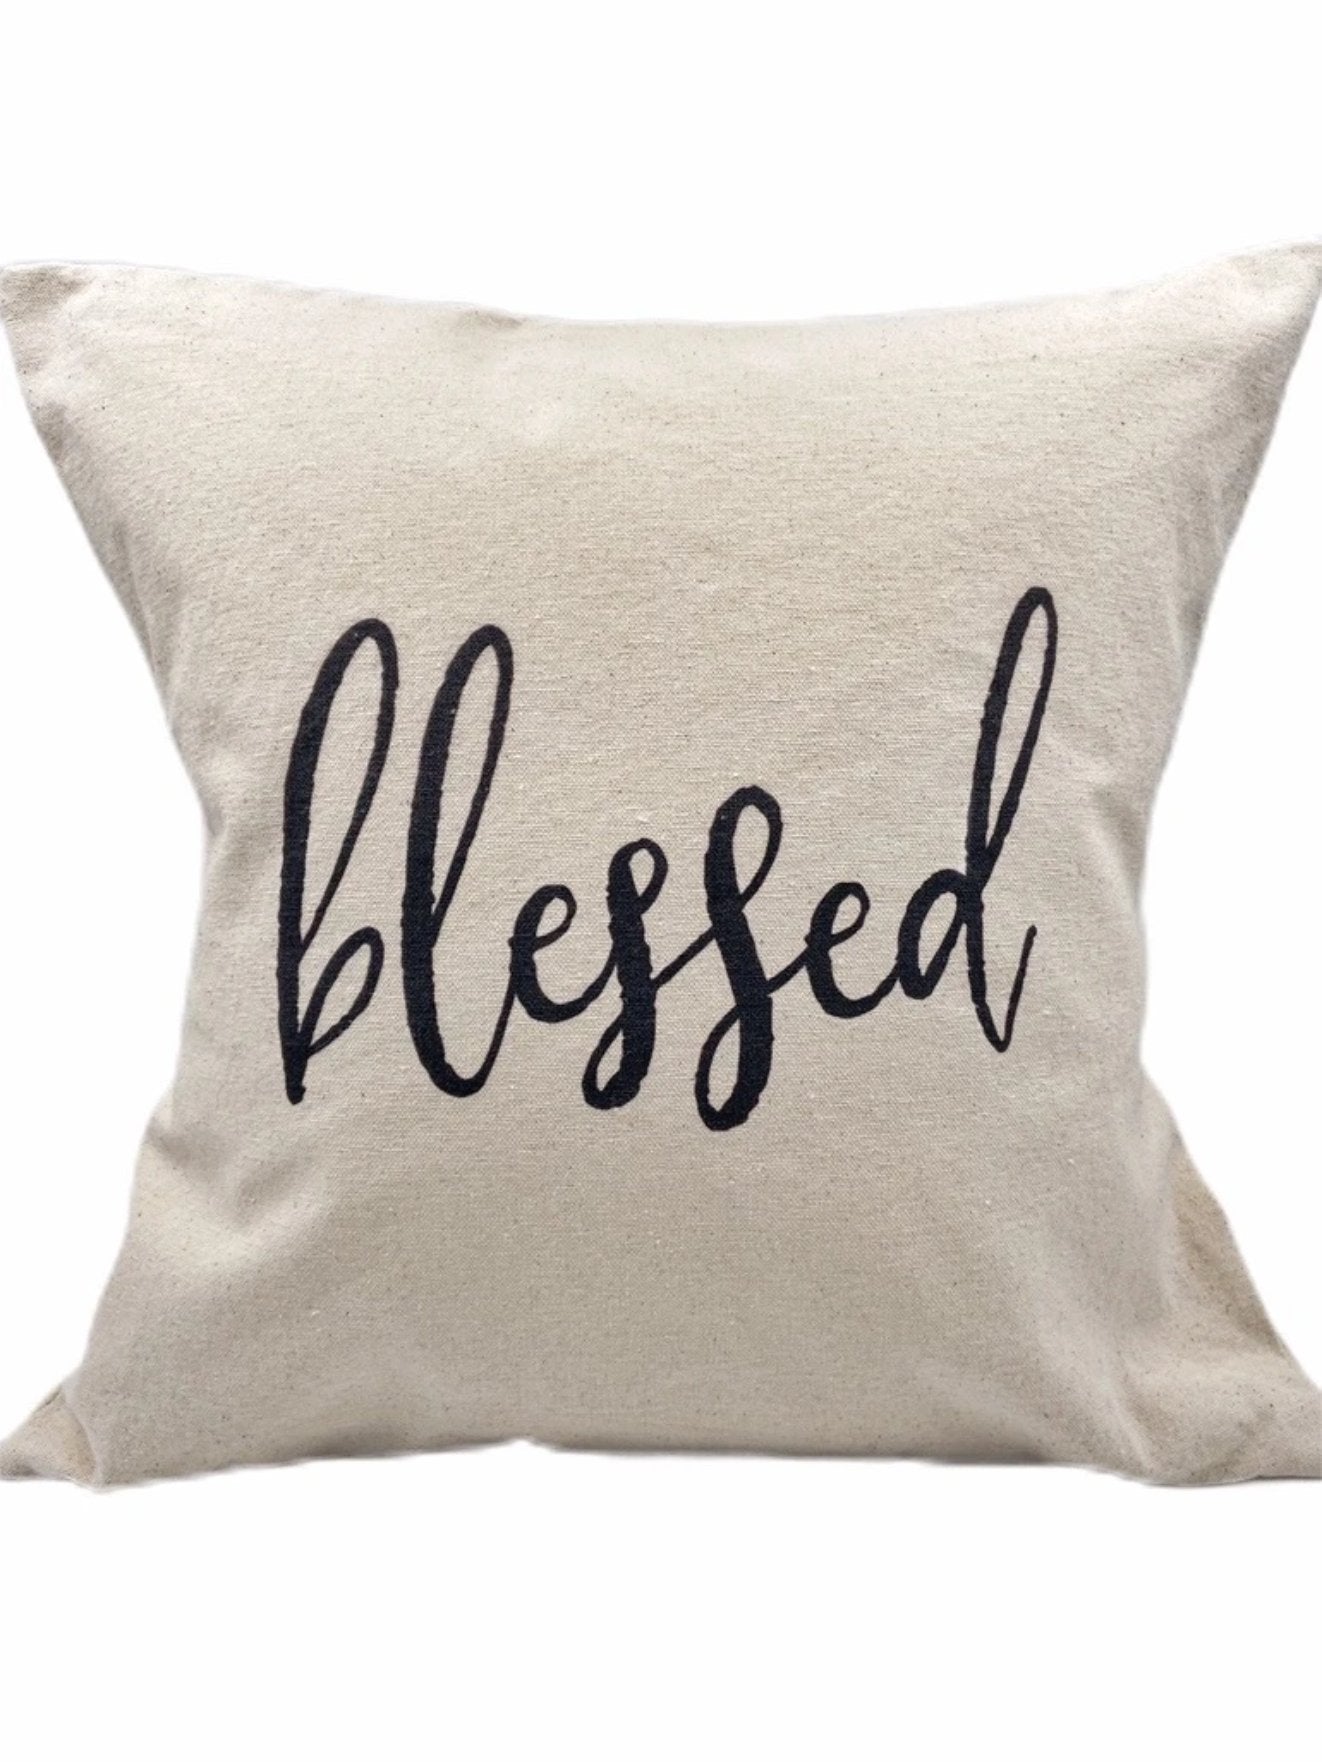 Blessed Pillow - Salt and Branch